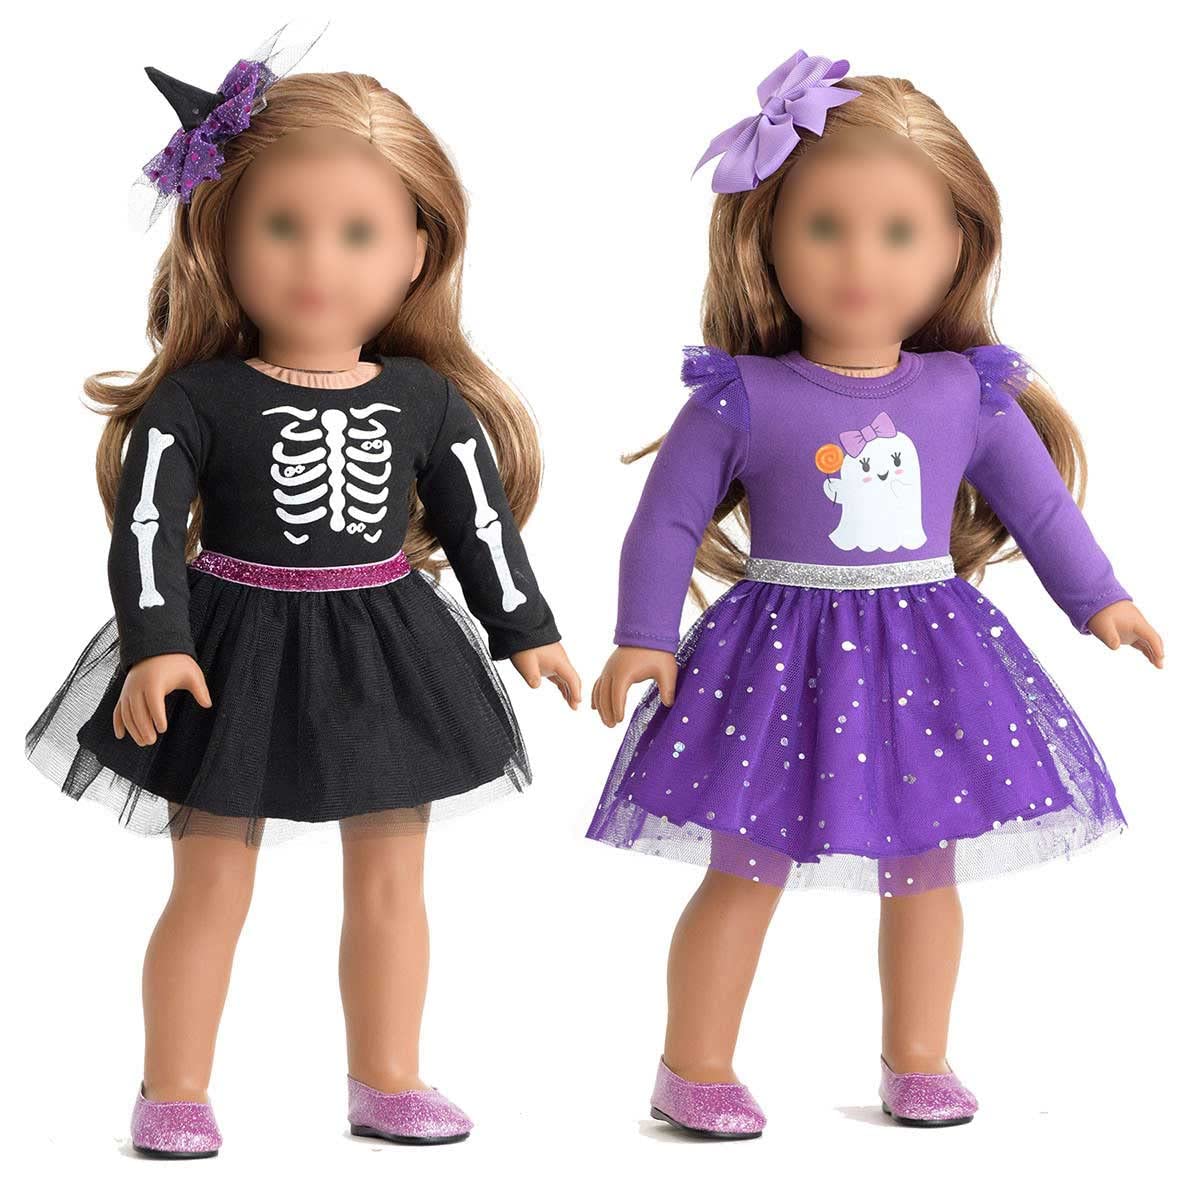 sweet dolly Doll Clothes Set, Doll Shoes &Accesories Included, 18 Inches Doll Halloween Costume Party Dress for American 18 inch Doll